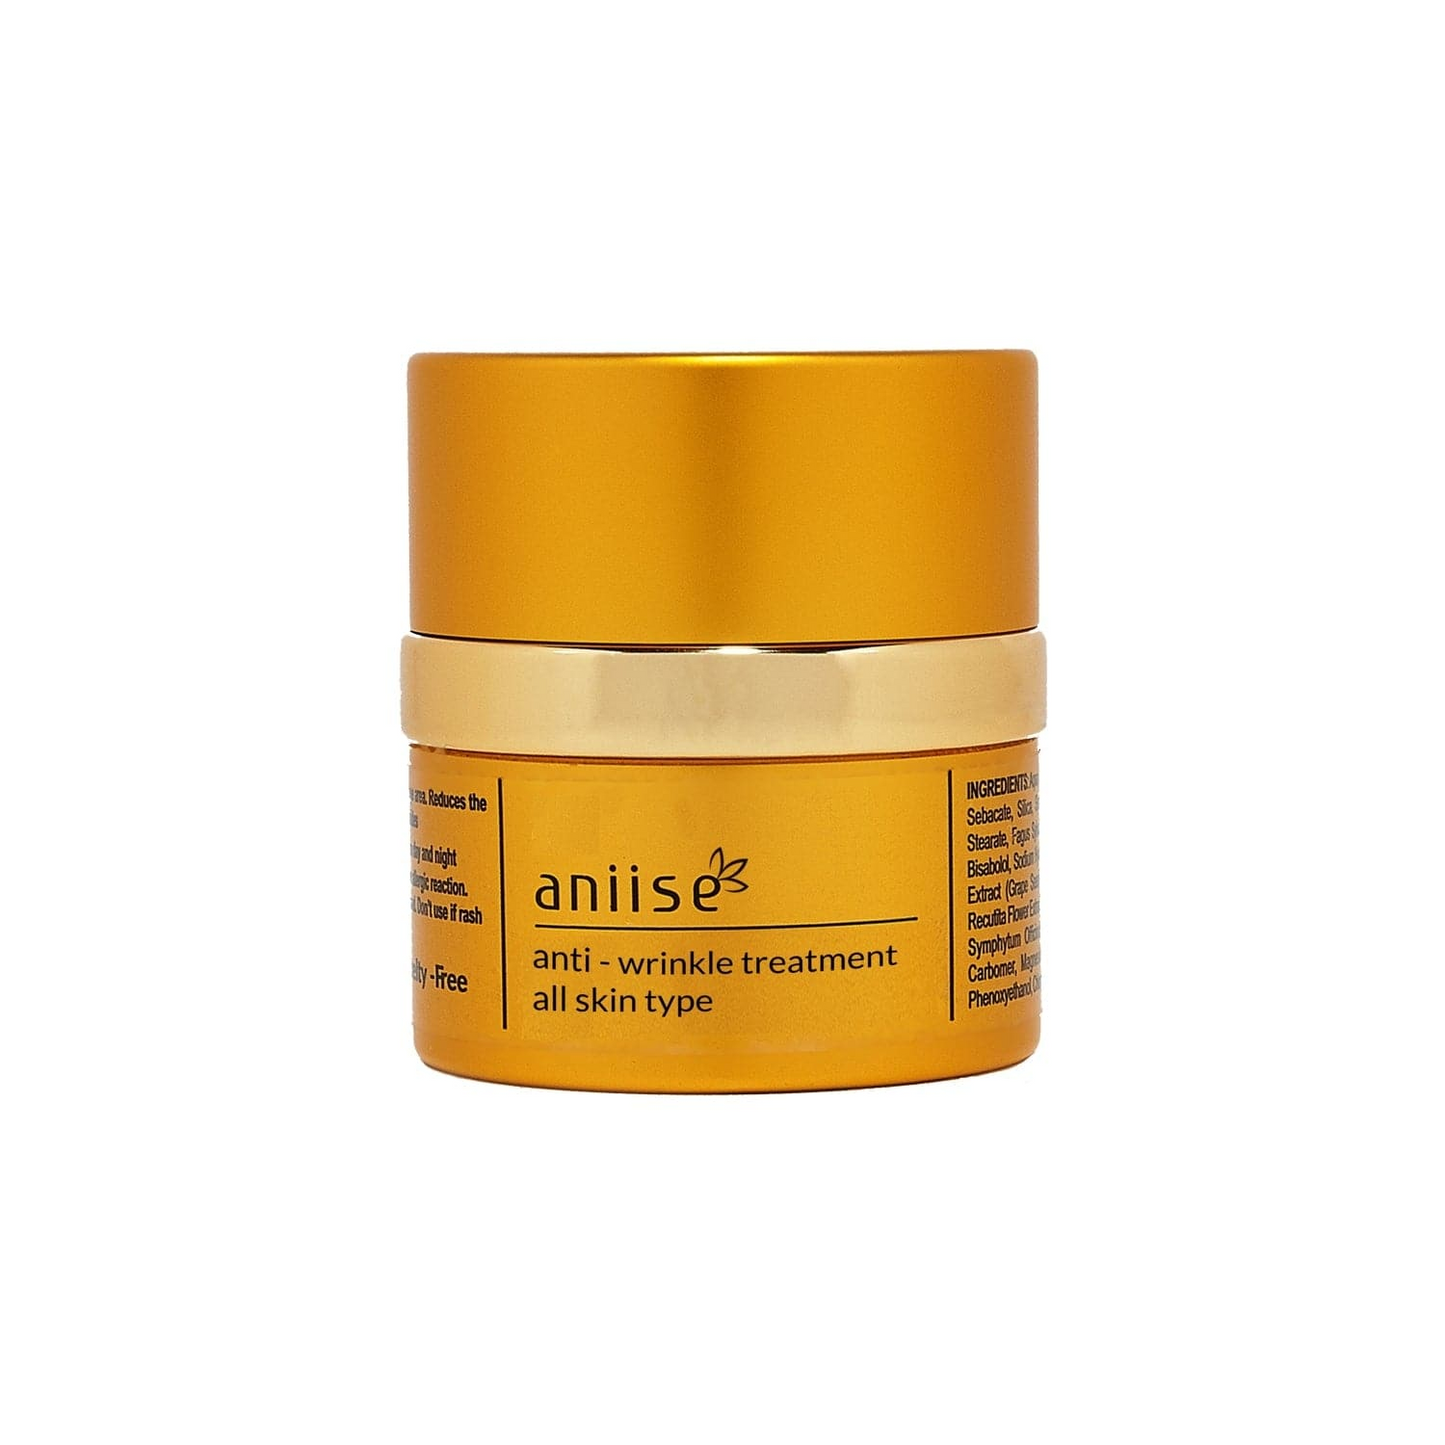 Anti-Wrinkle Treatment Cream for Face and Neck - Reduce Wrinkles and Rejuvenate Skin